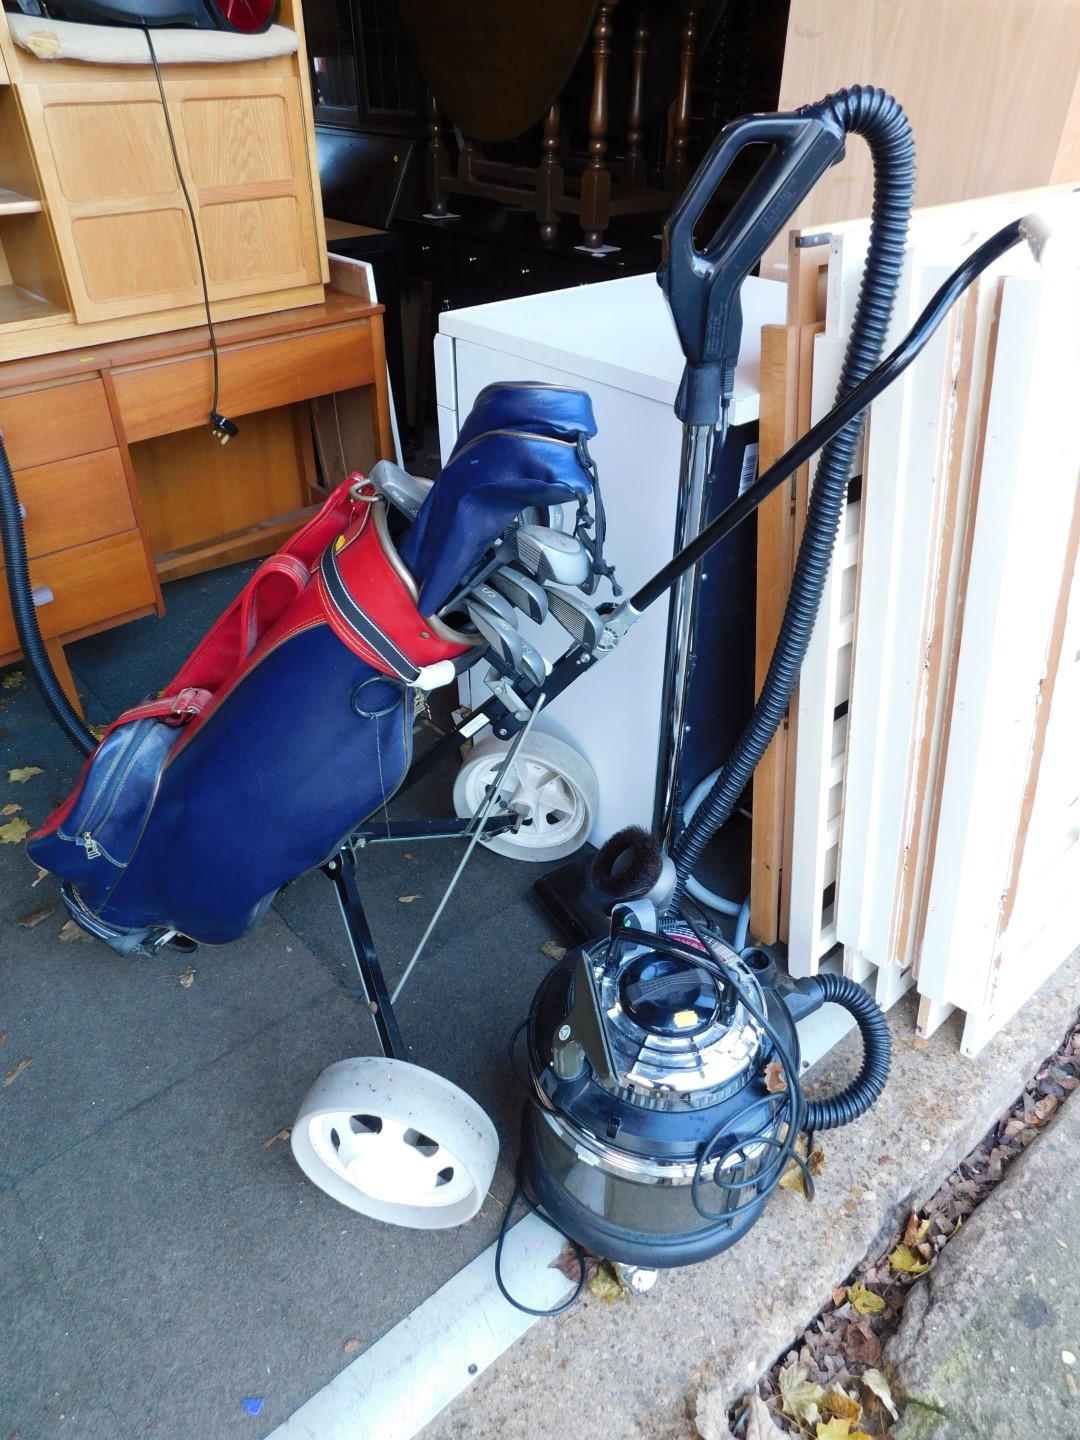 A Majestic Filter Queen vacuum cleaner, together with a golf buggy and various clubs. (2)